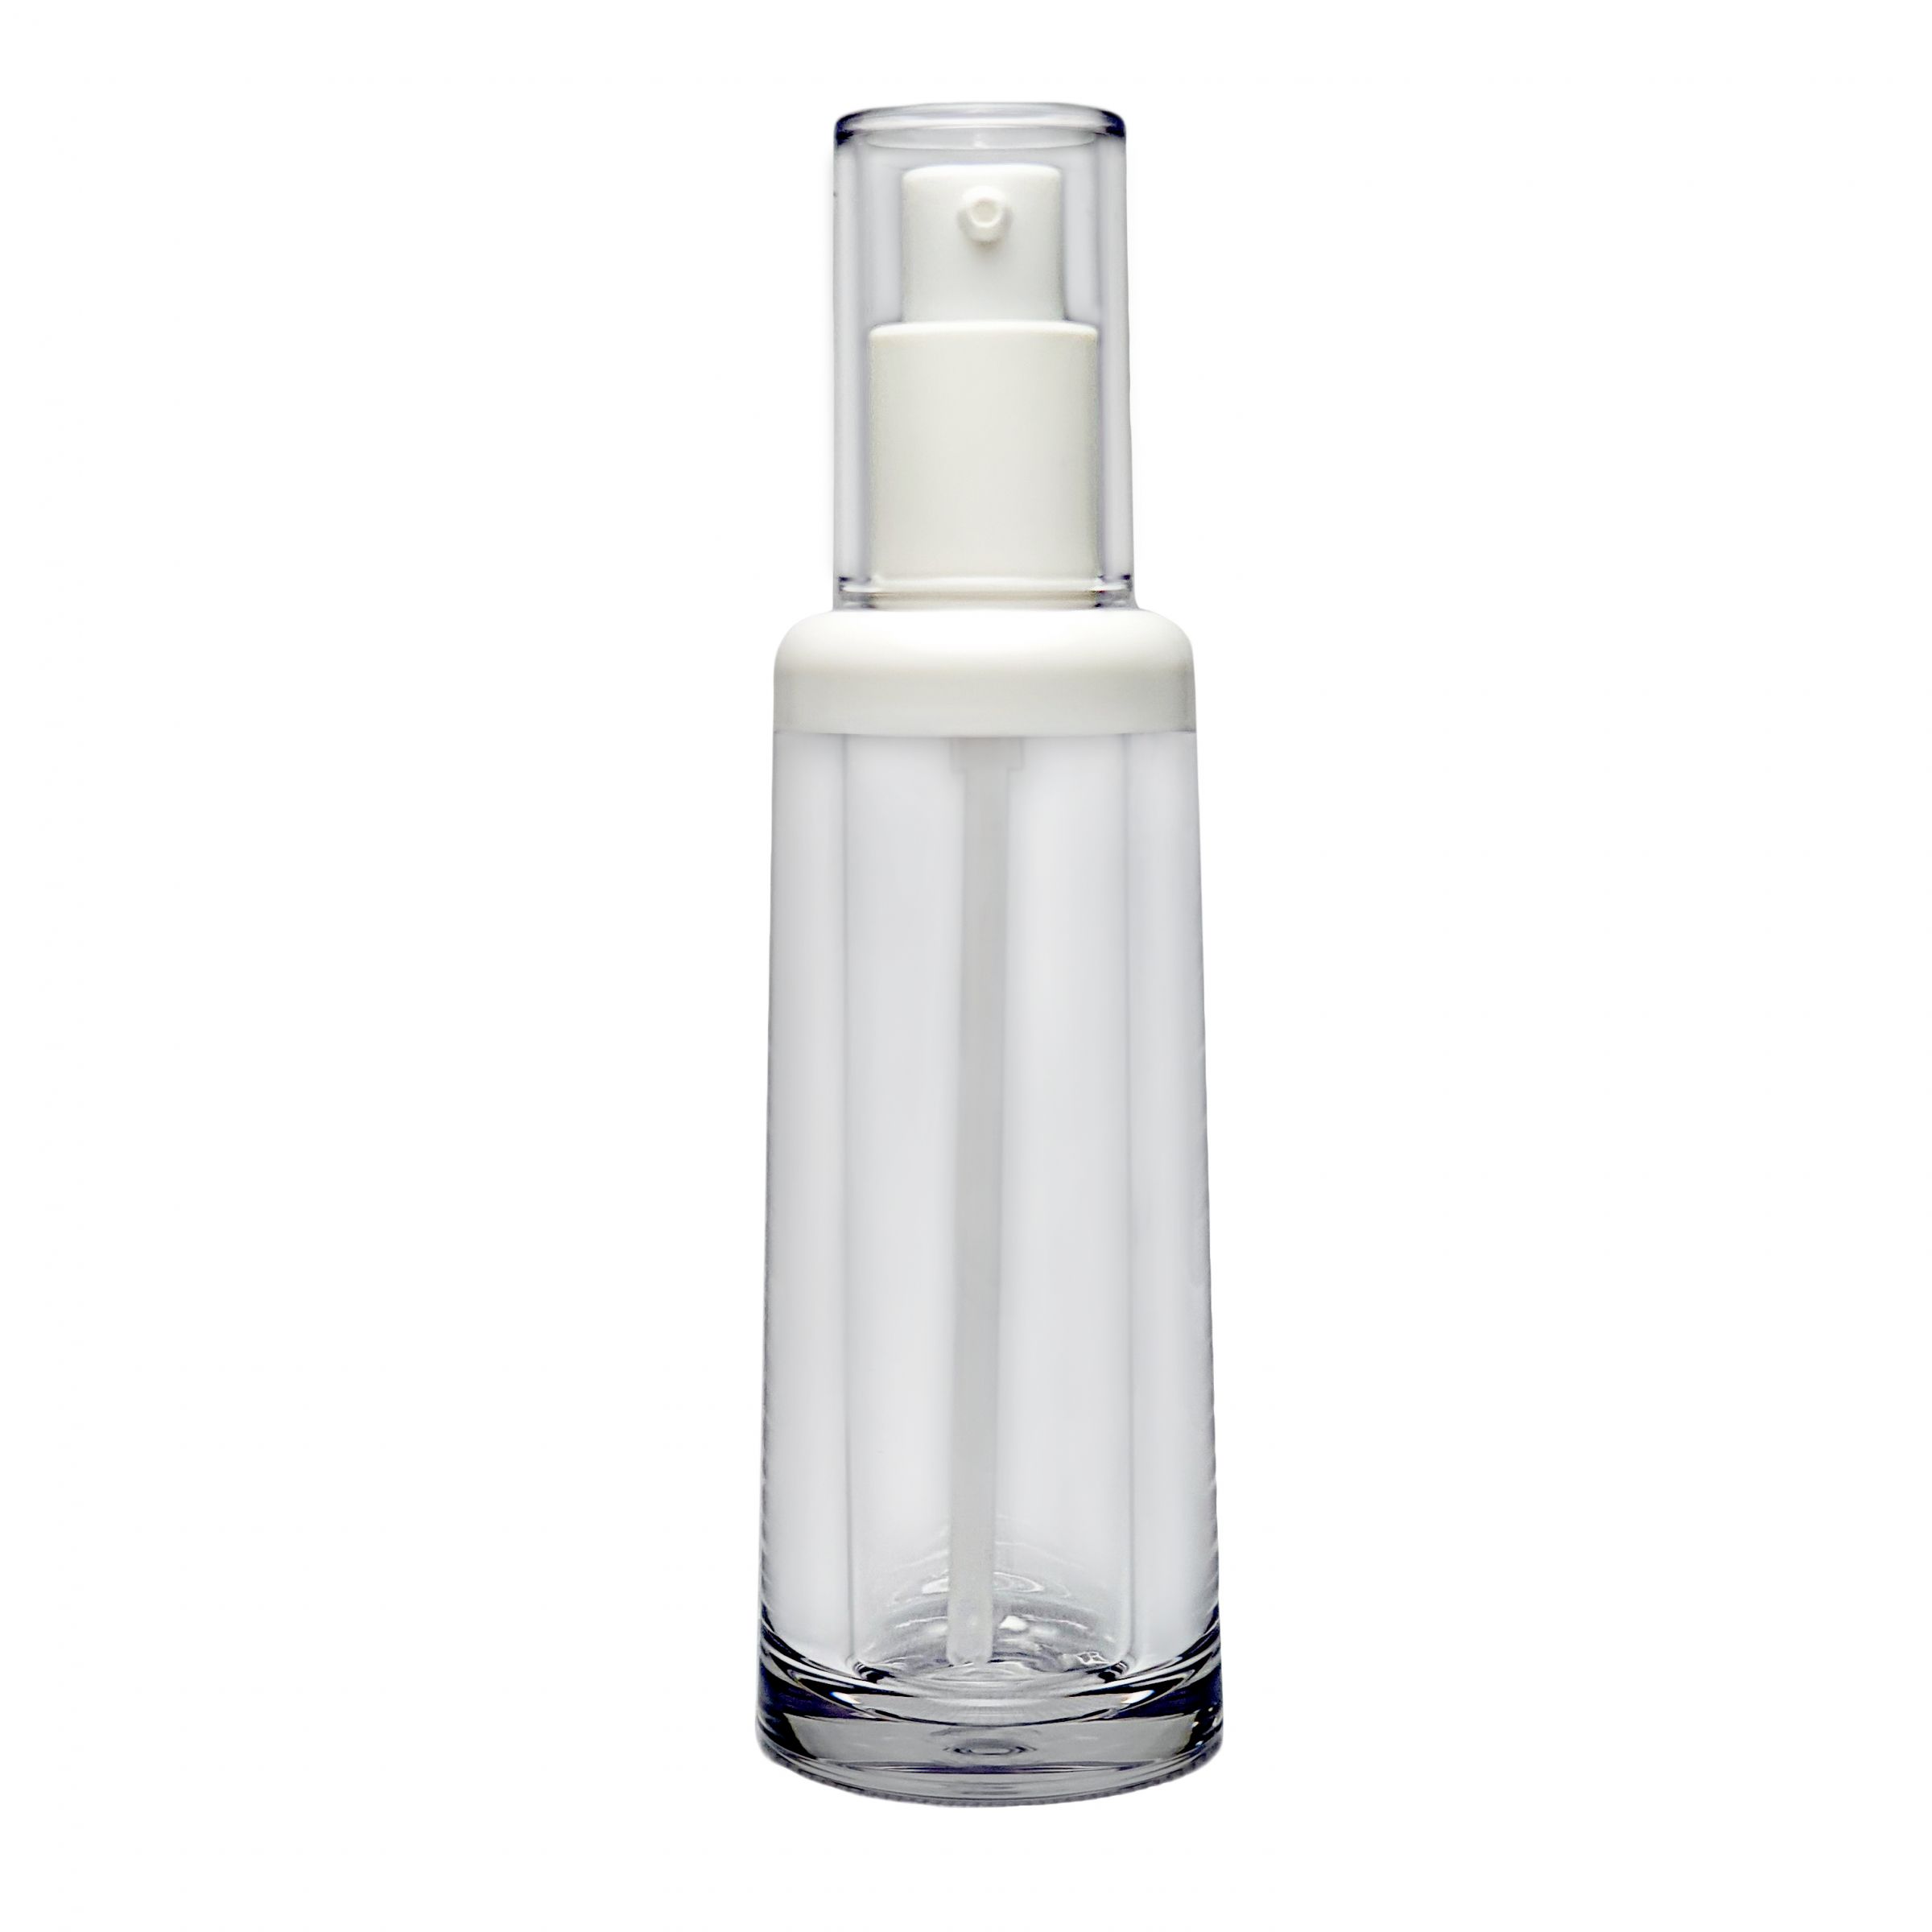 Refillable Round Lotion/Spray Bottle 30ml - CRB-30 Refillable Packaging